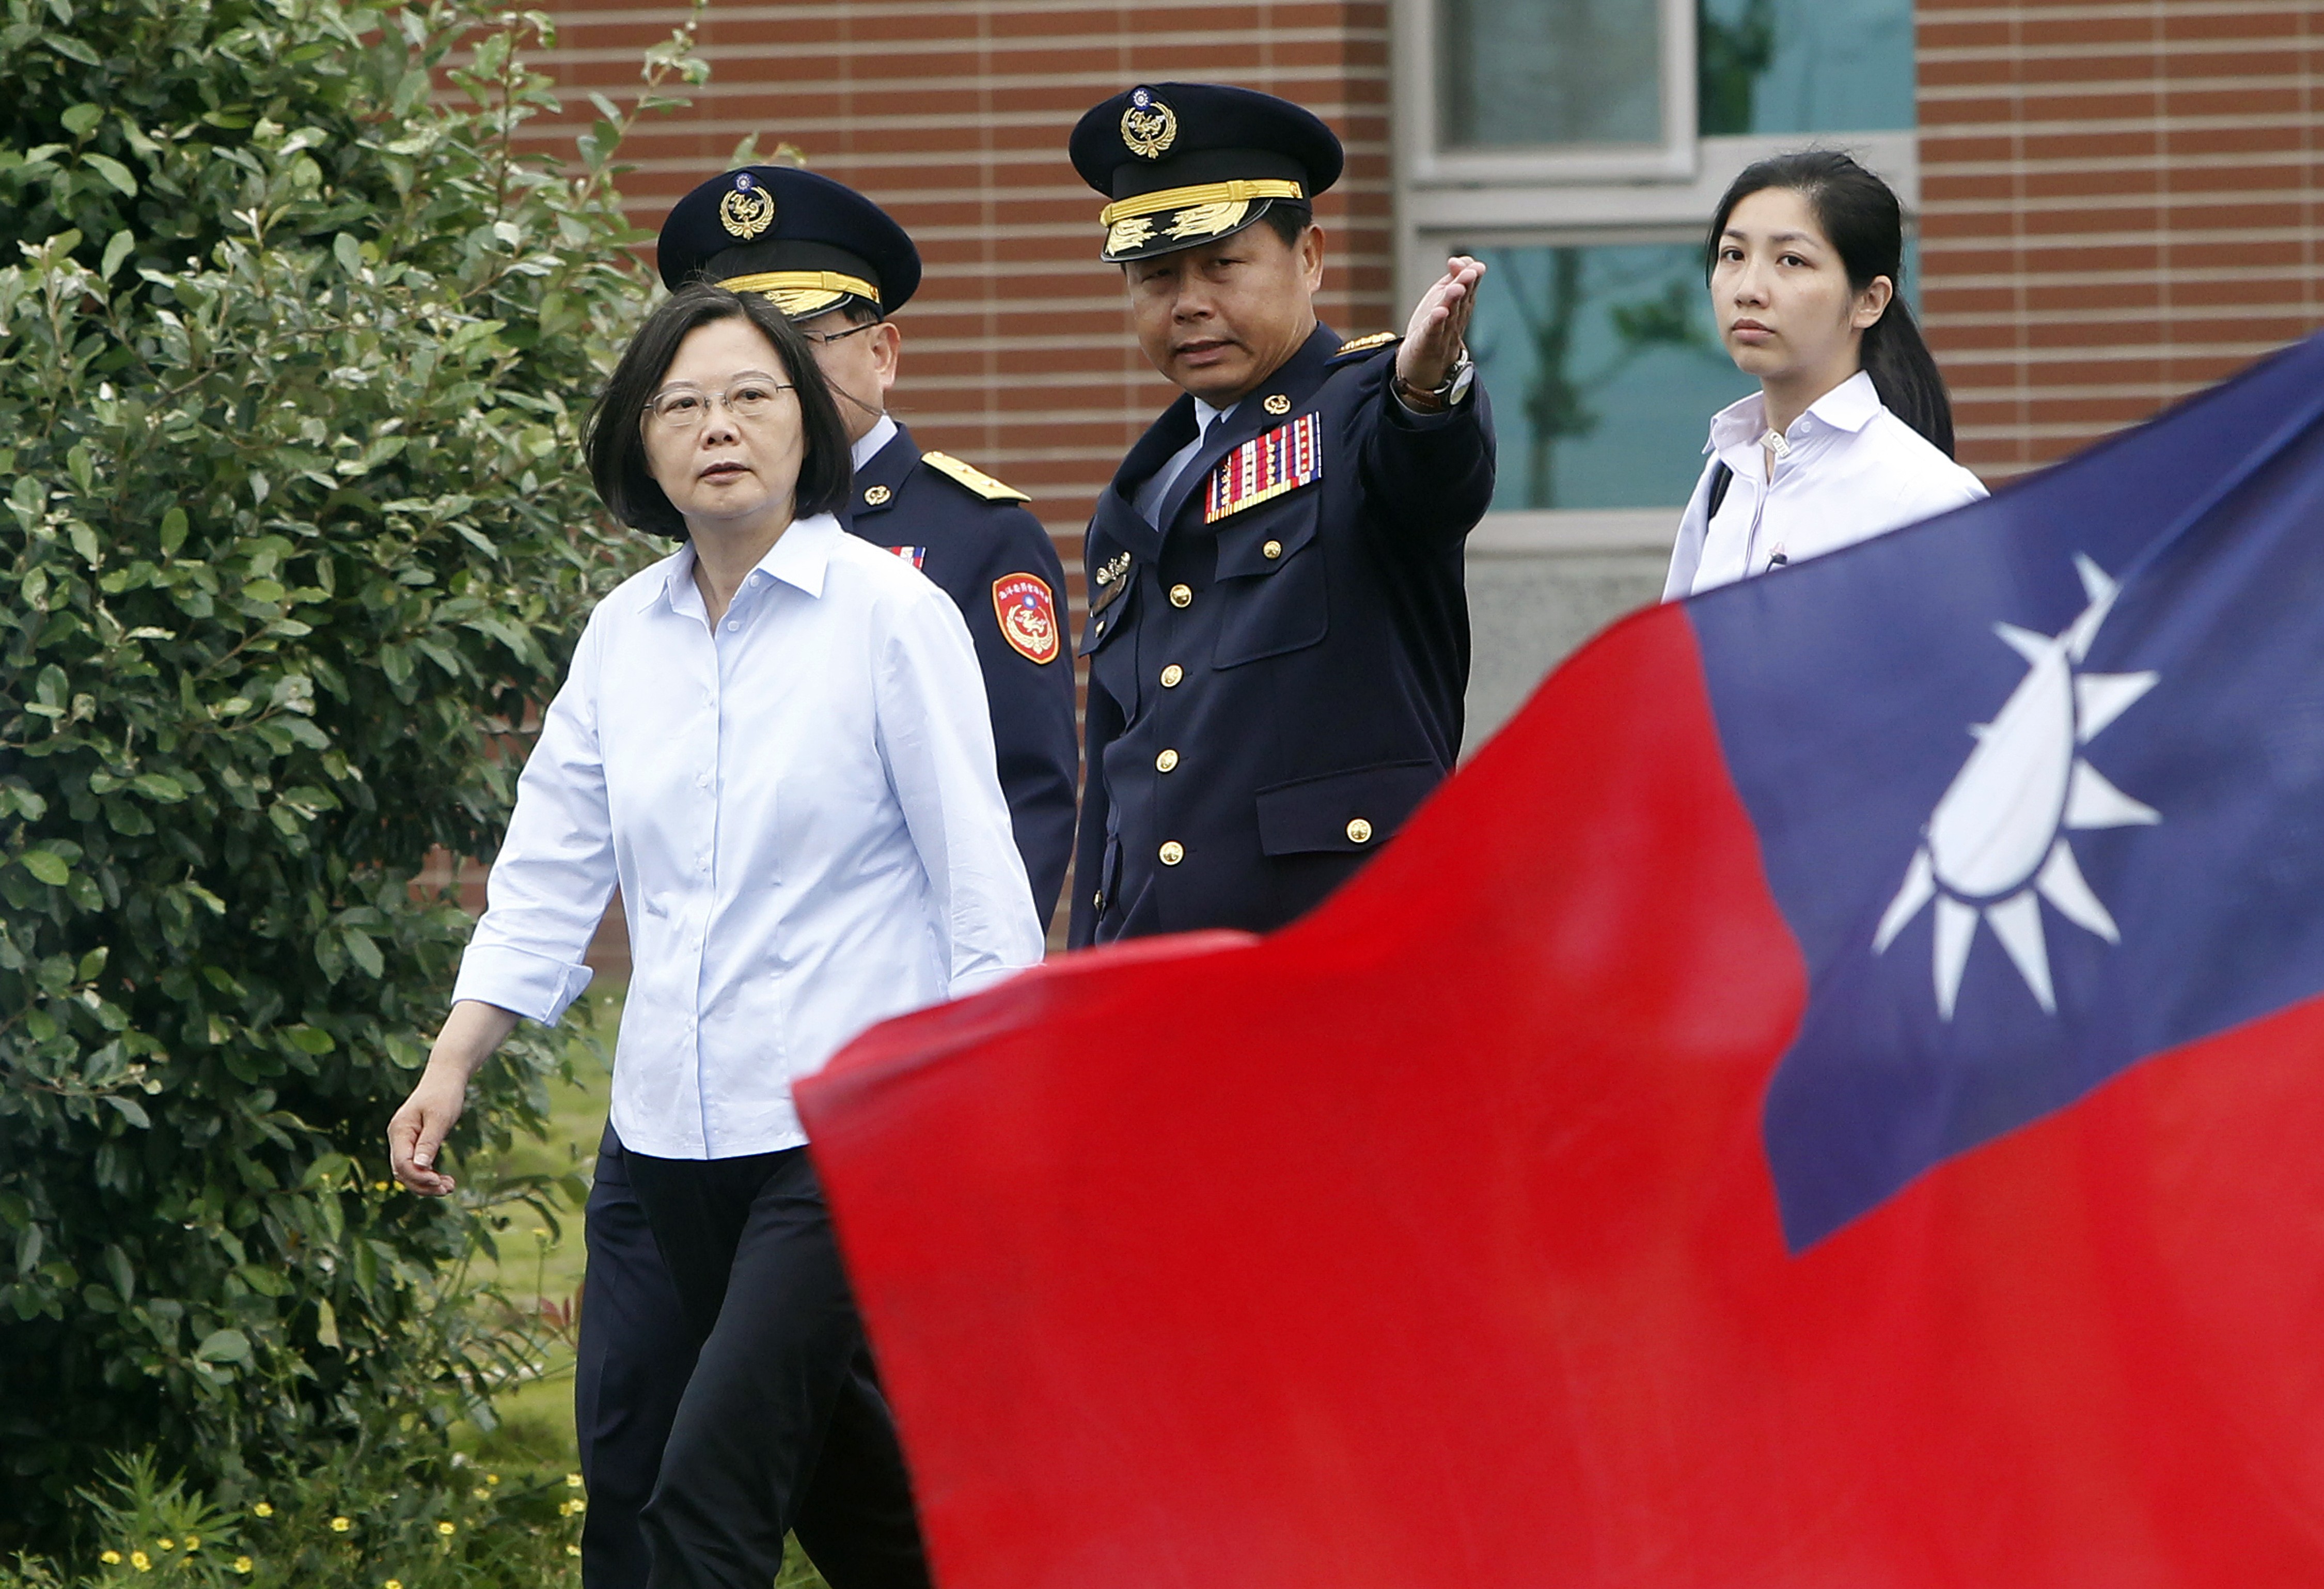 Taiwanese President Tsai Ing-wen, left, walks past a Taiwan national flag during an offshore anti-terrorism drill outside Taipei harbor in New Taipei City, on August 15. Tsai has been vocal in her support of the demonstrations in Hong Kong against China’s deepening encroachment. Photo: AP